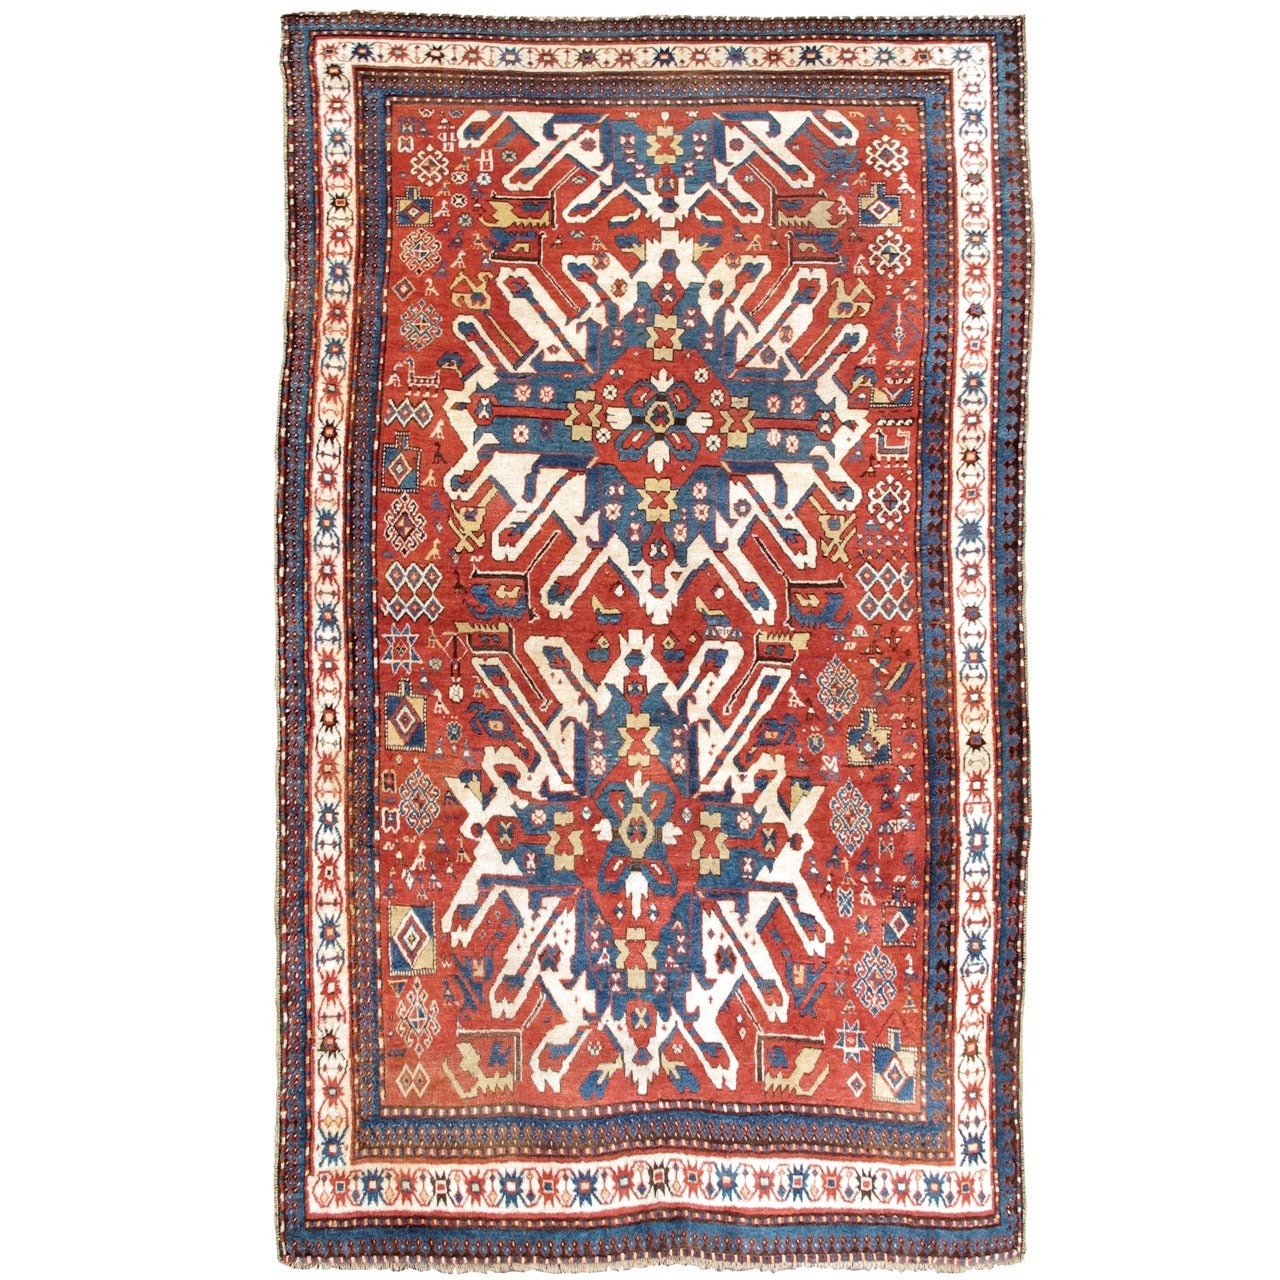 19th Century Red and Blue Eagle Karabagh Rug